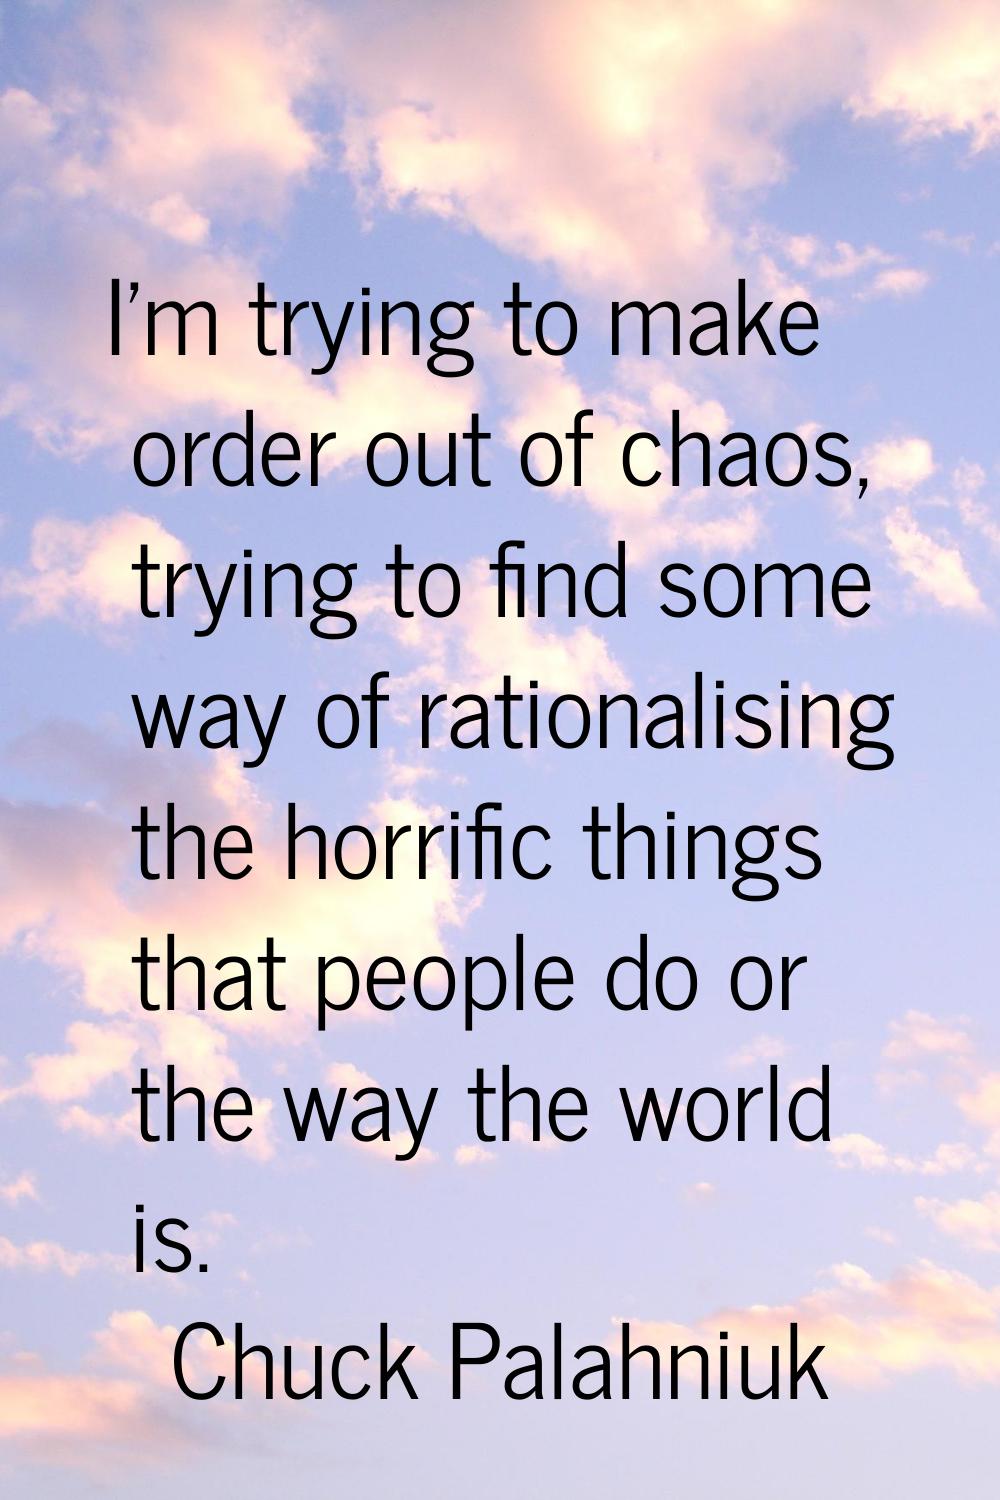 I'm trying to make order out of chaos, trying to find some way of rationalising the horrific things